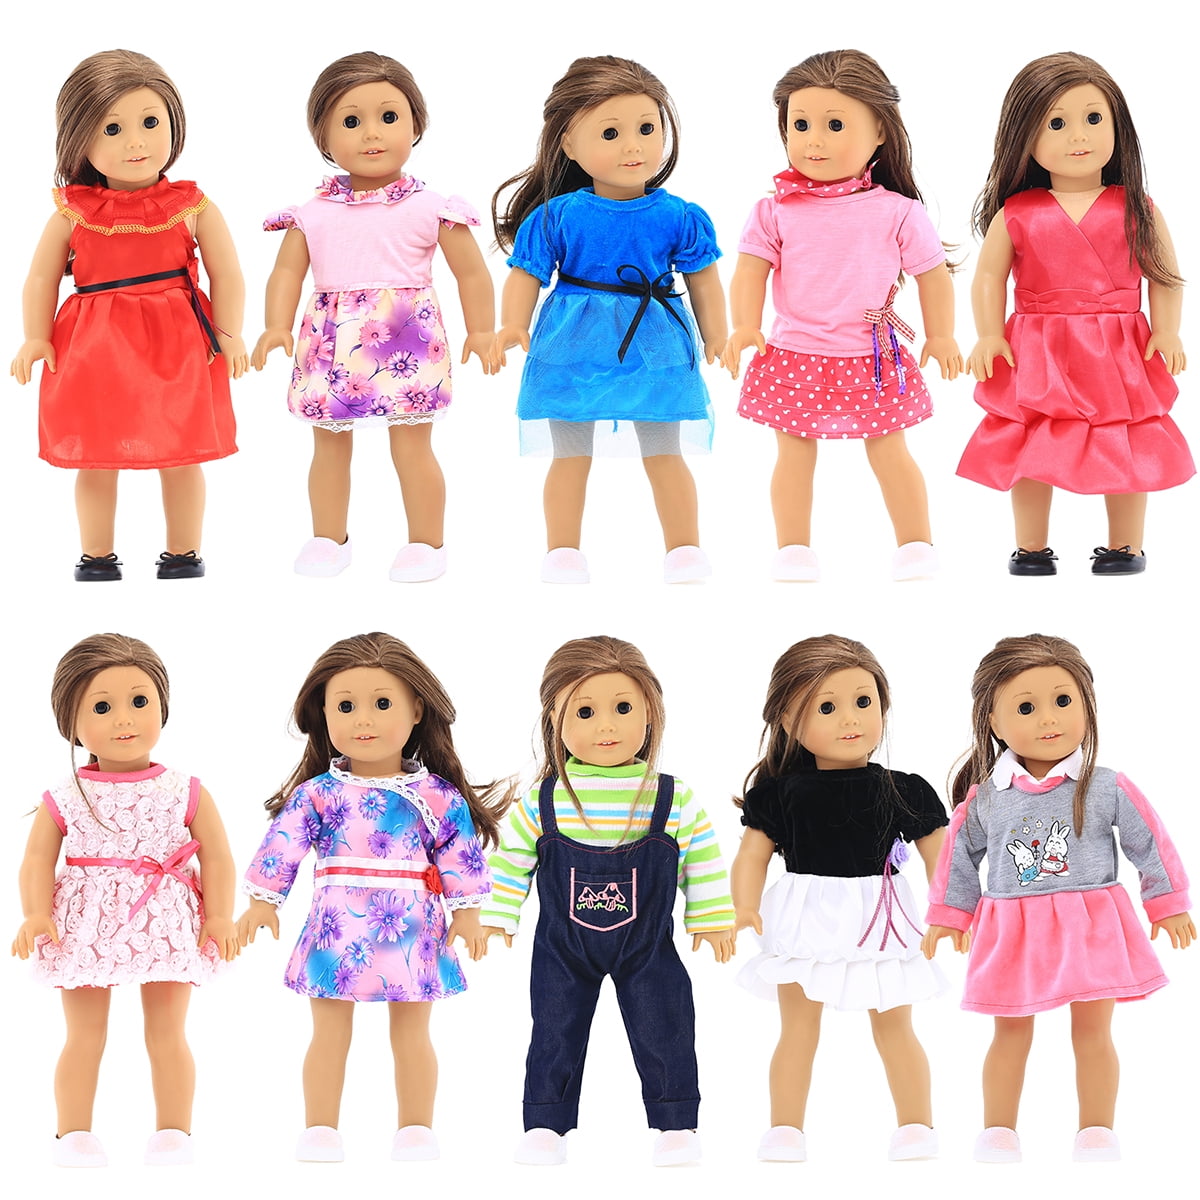 my life our generation 18 Doll Paris Glitter Dress Retro fits American girl 